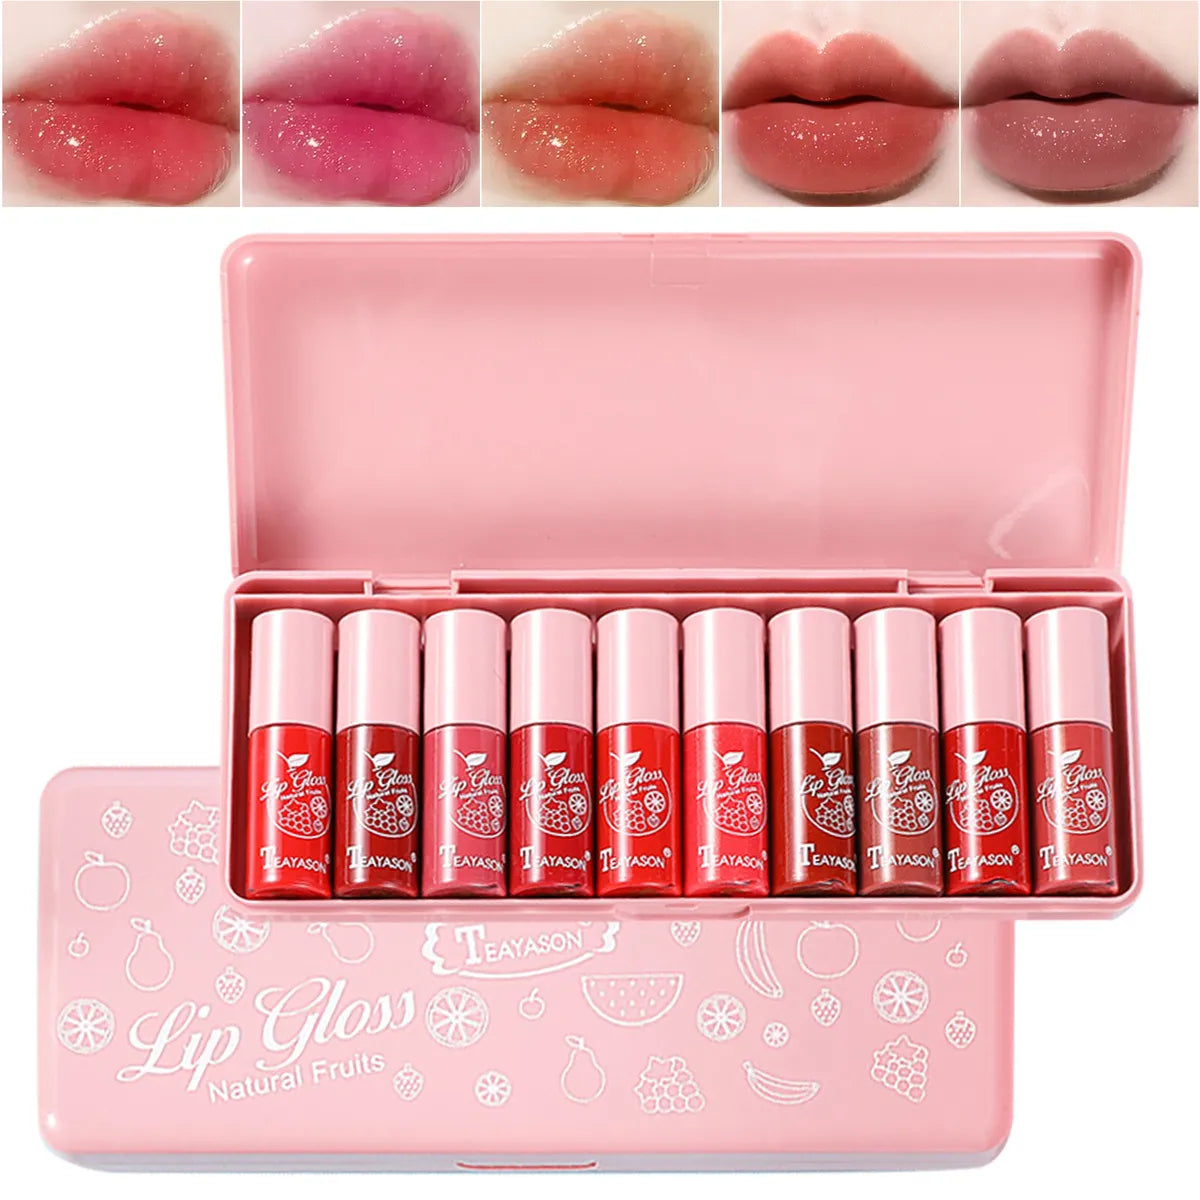 Pack of 10 Teayson Lip Glow Glosses